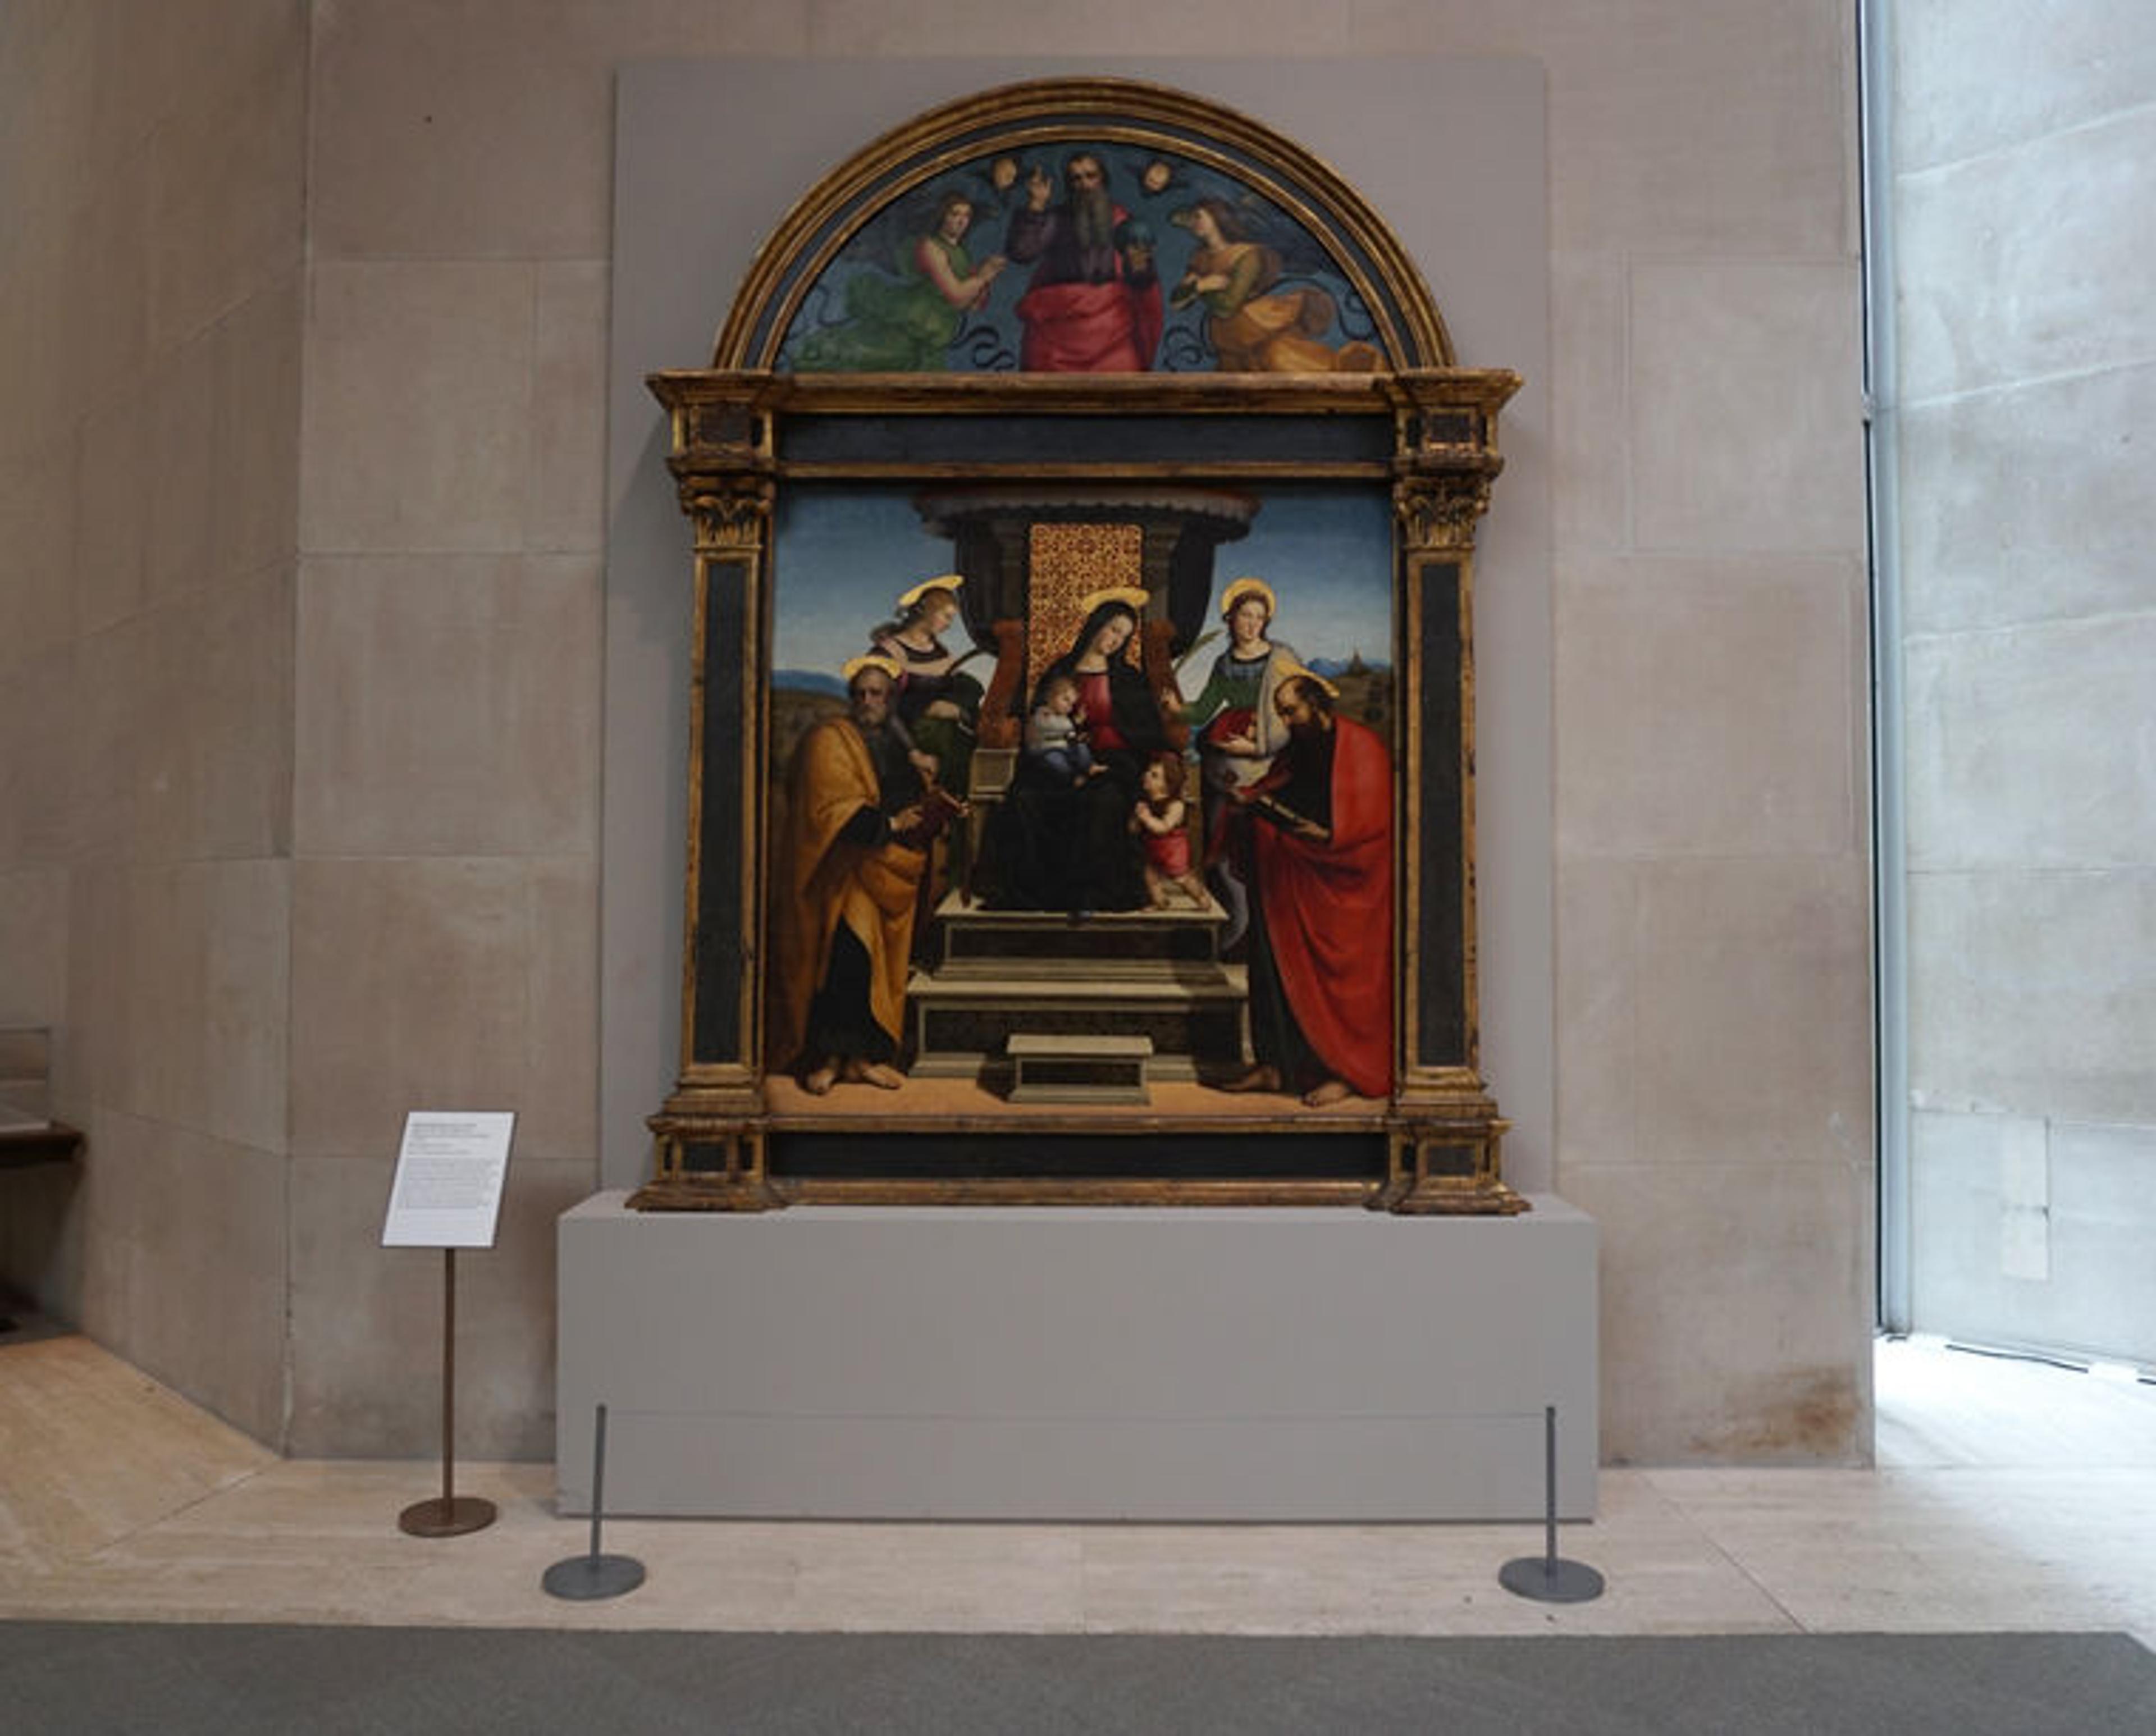 Installation view of Raphael's 'Madonna and Child Enthroned with Saints' in a gallery in The Met's Robert Lehman Wing